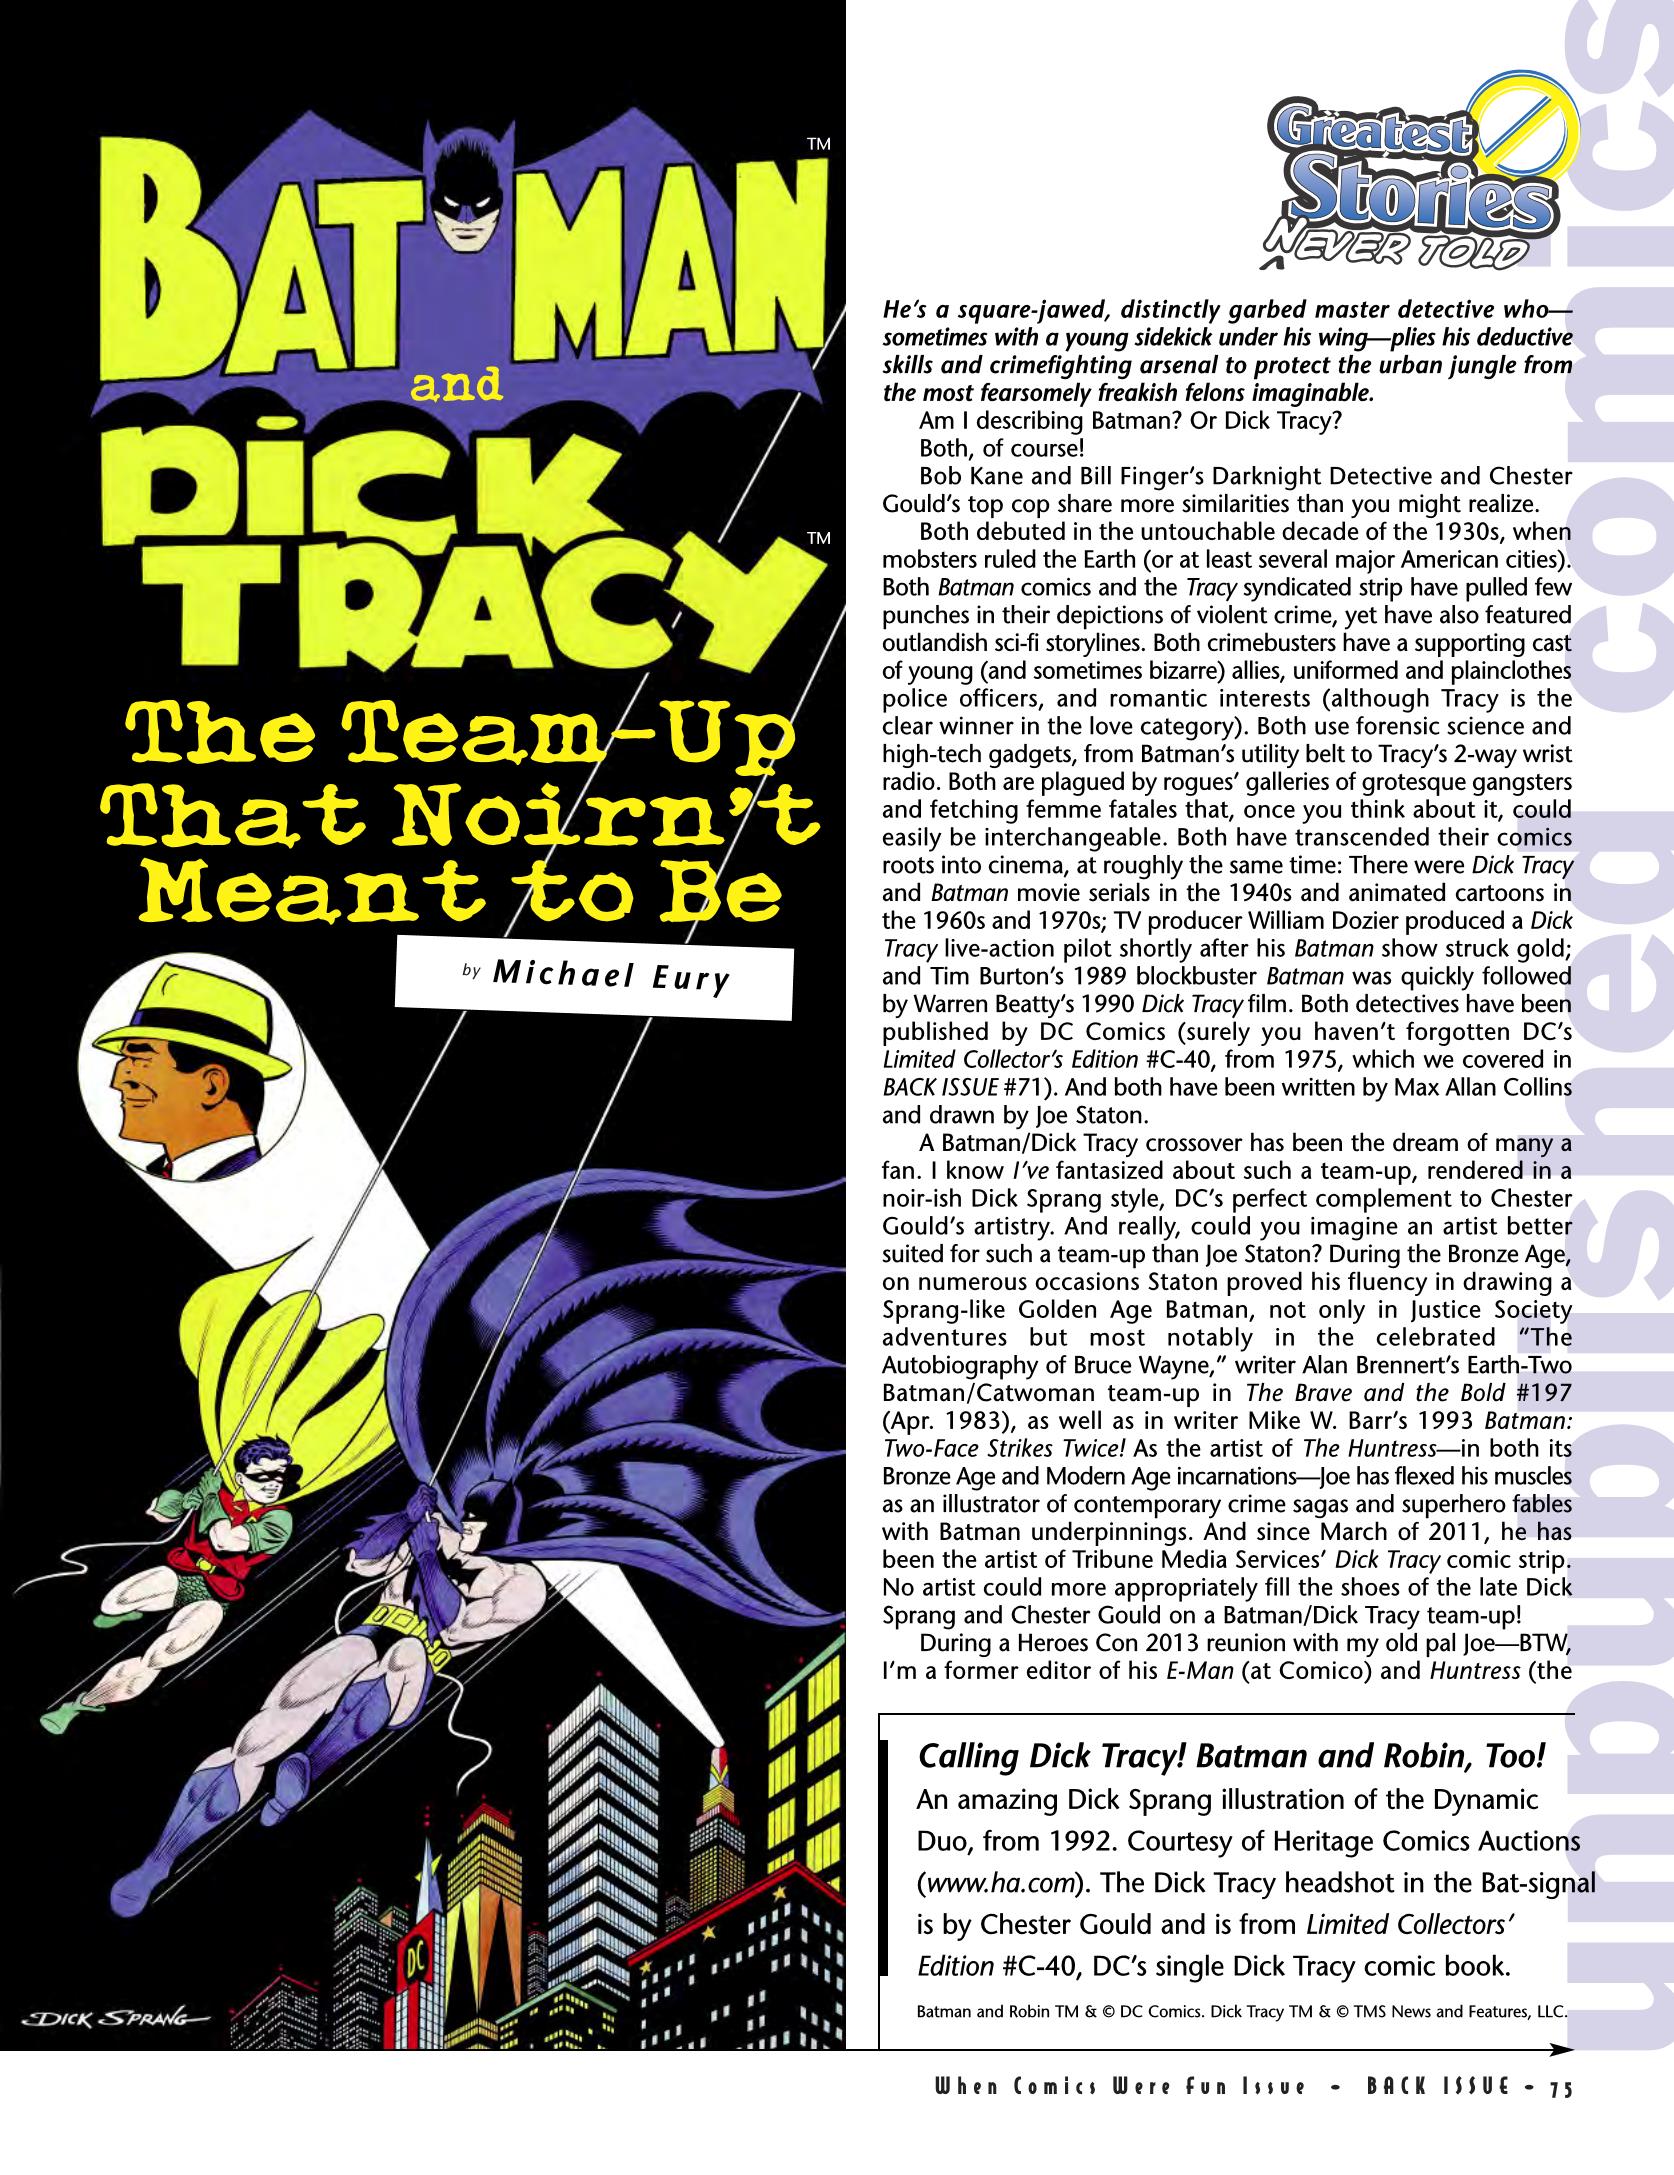 Read online Back Issue comic -  Issue #77 - 75